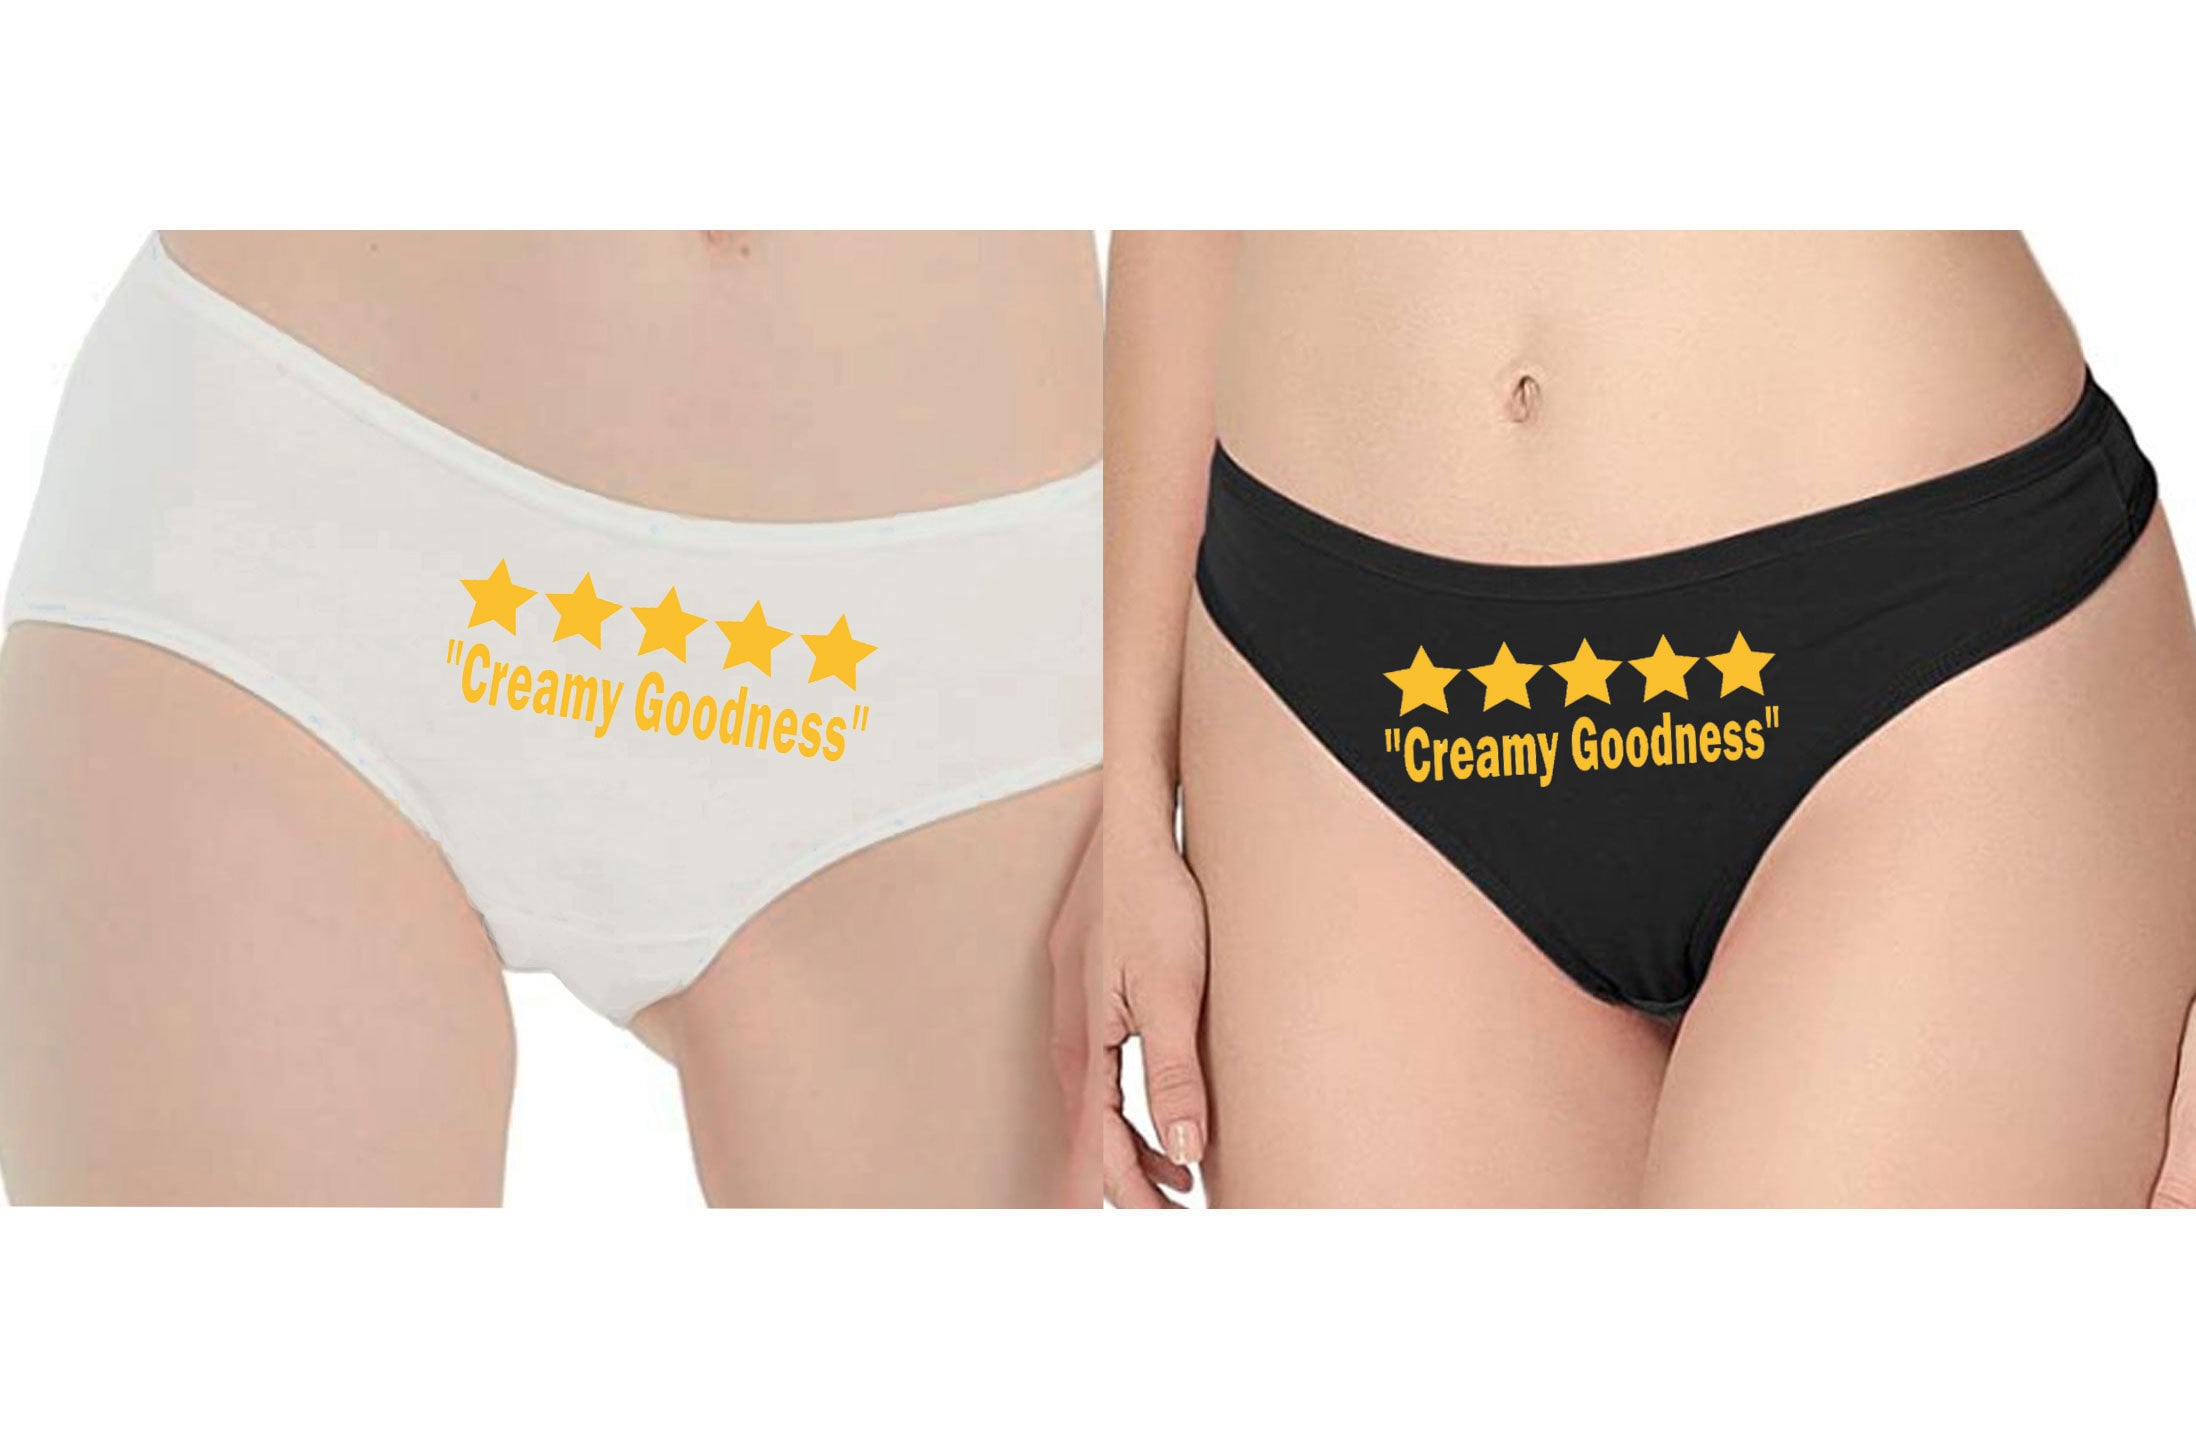 Suggestive panties for her, creamy goodness yelp review thong